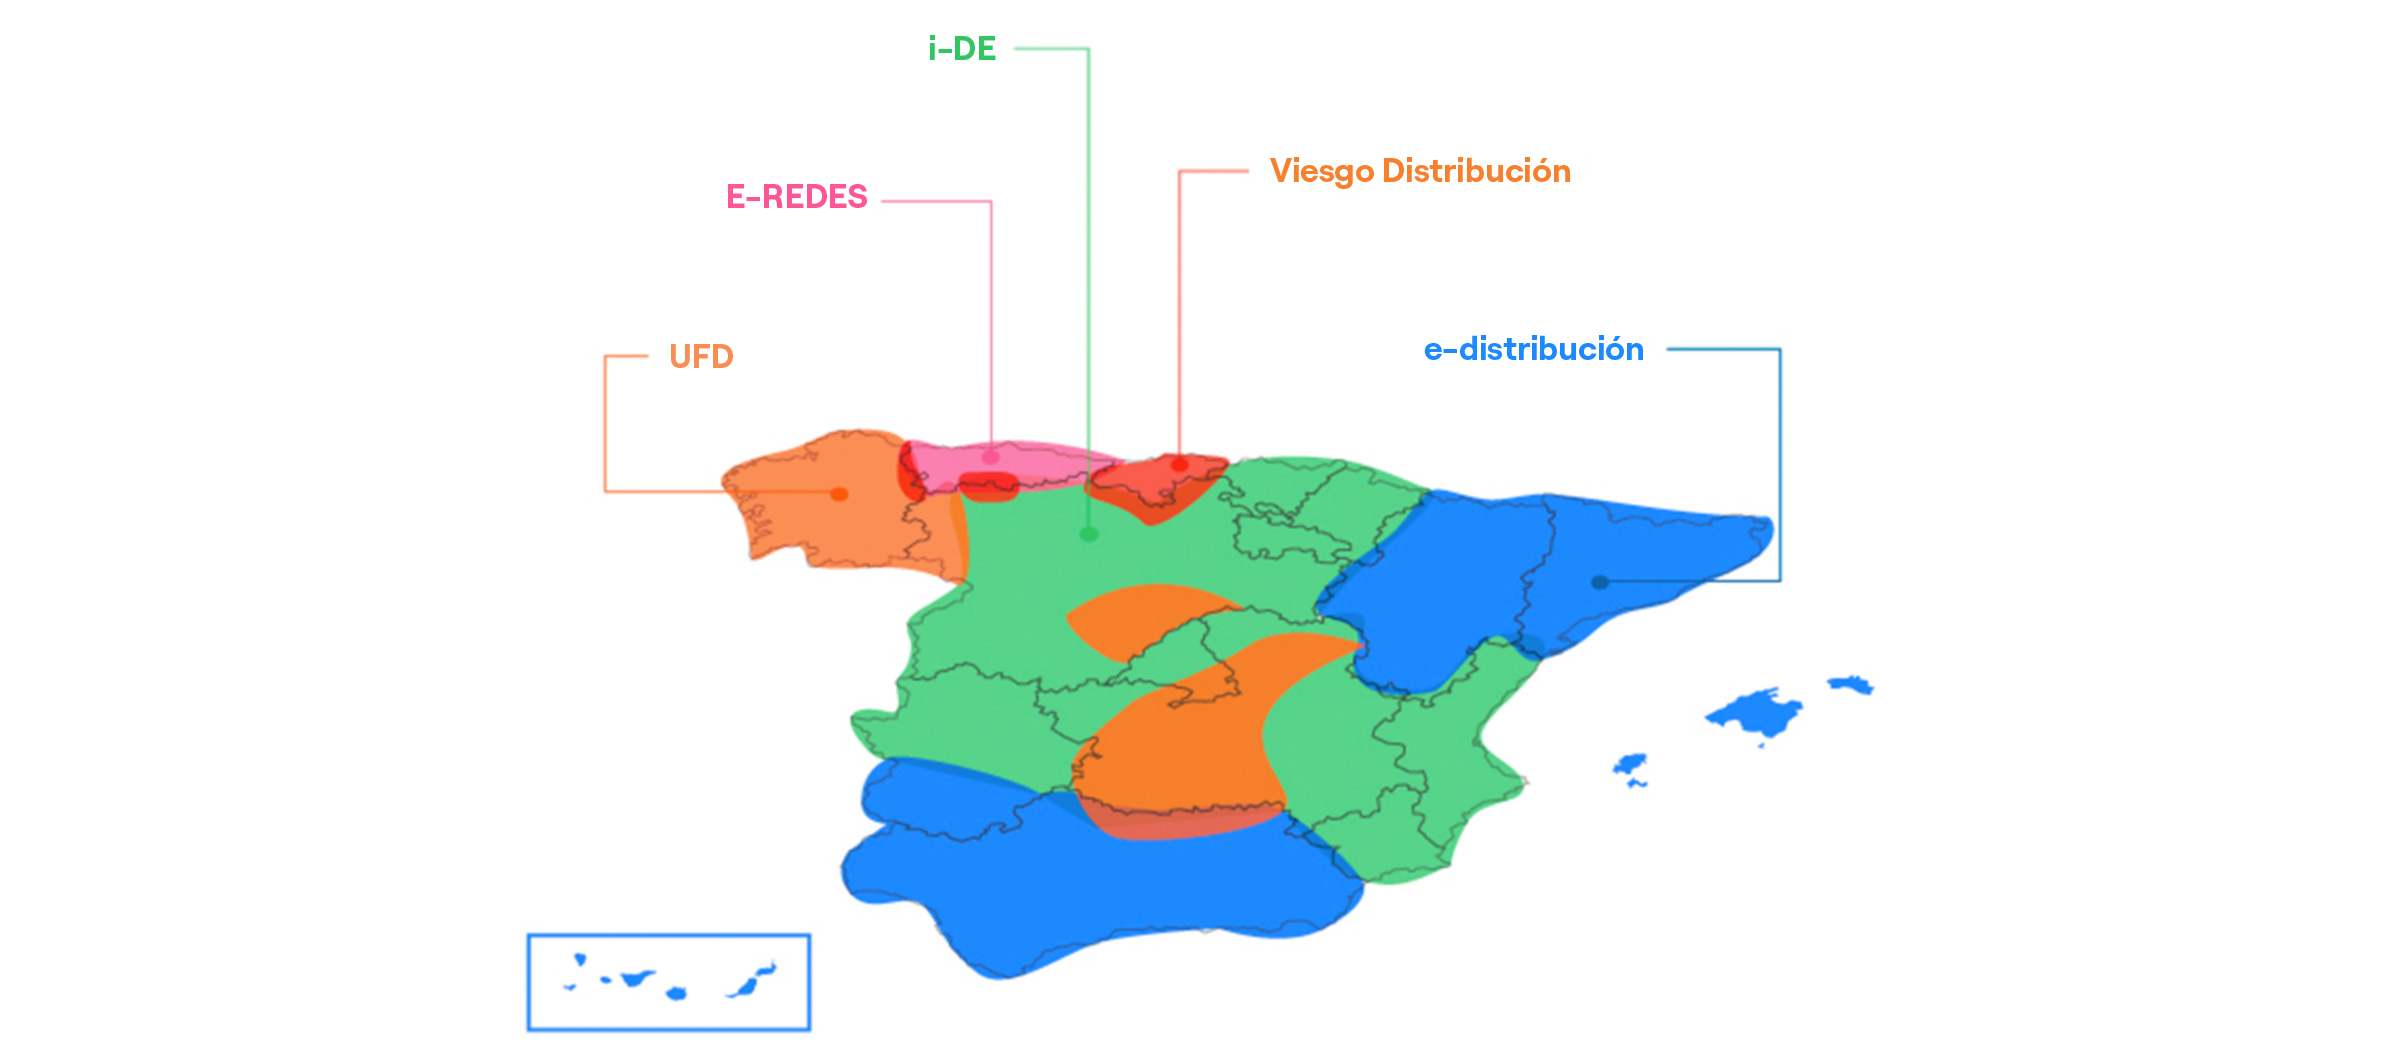 Map of Spain with the areas corresponding to each electricity distribution company.